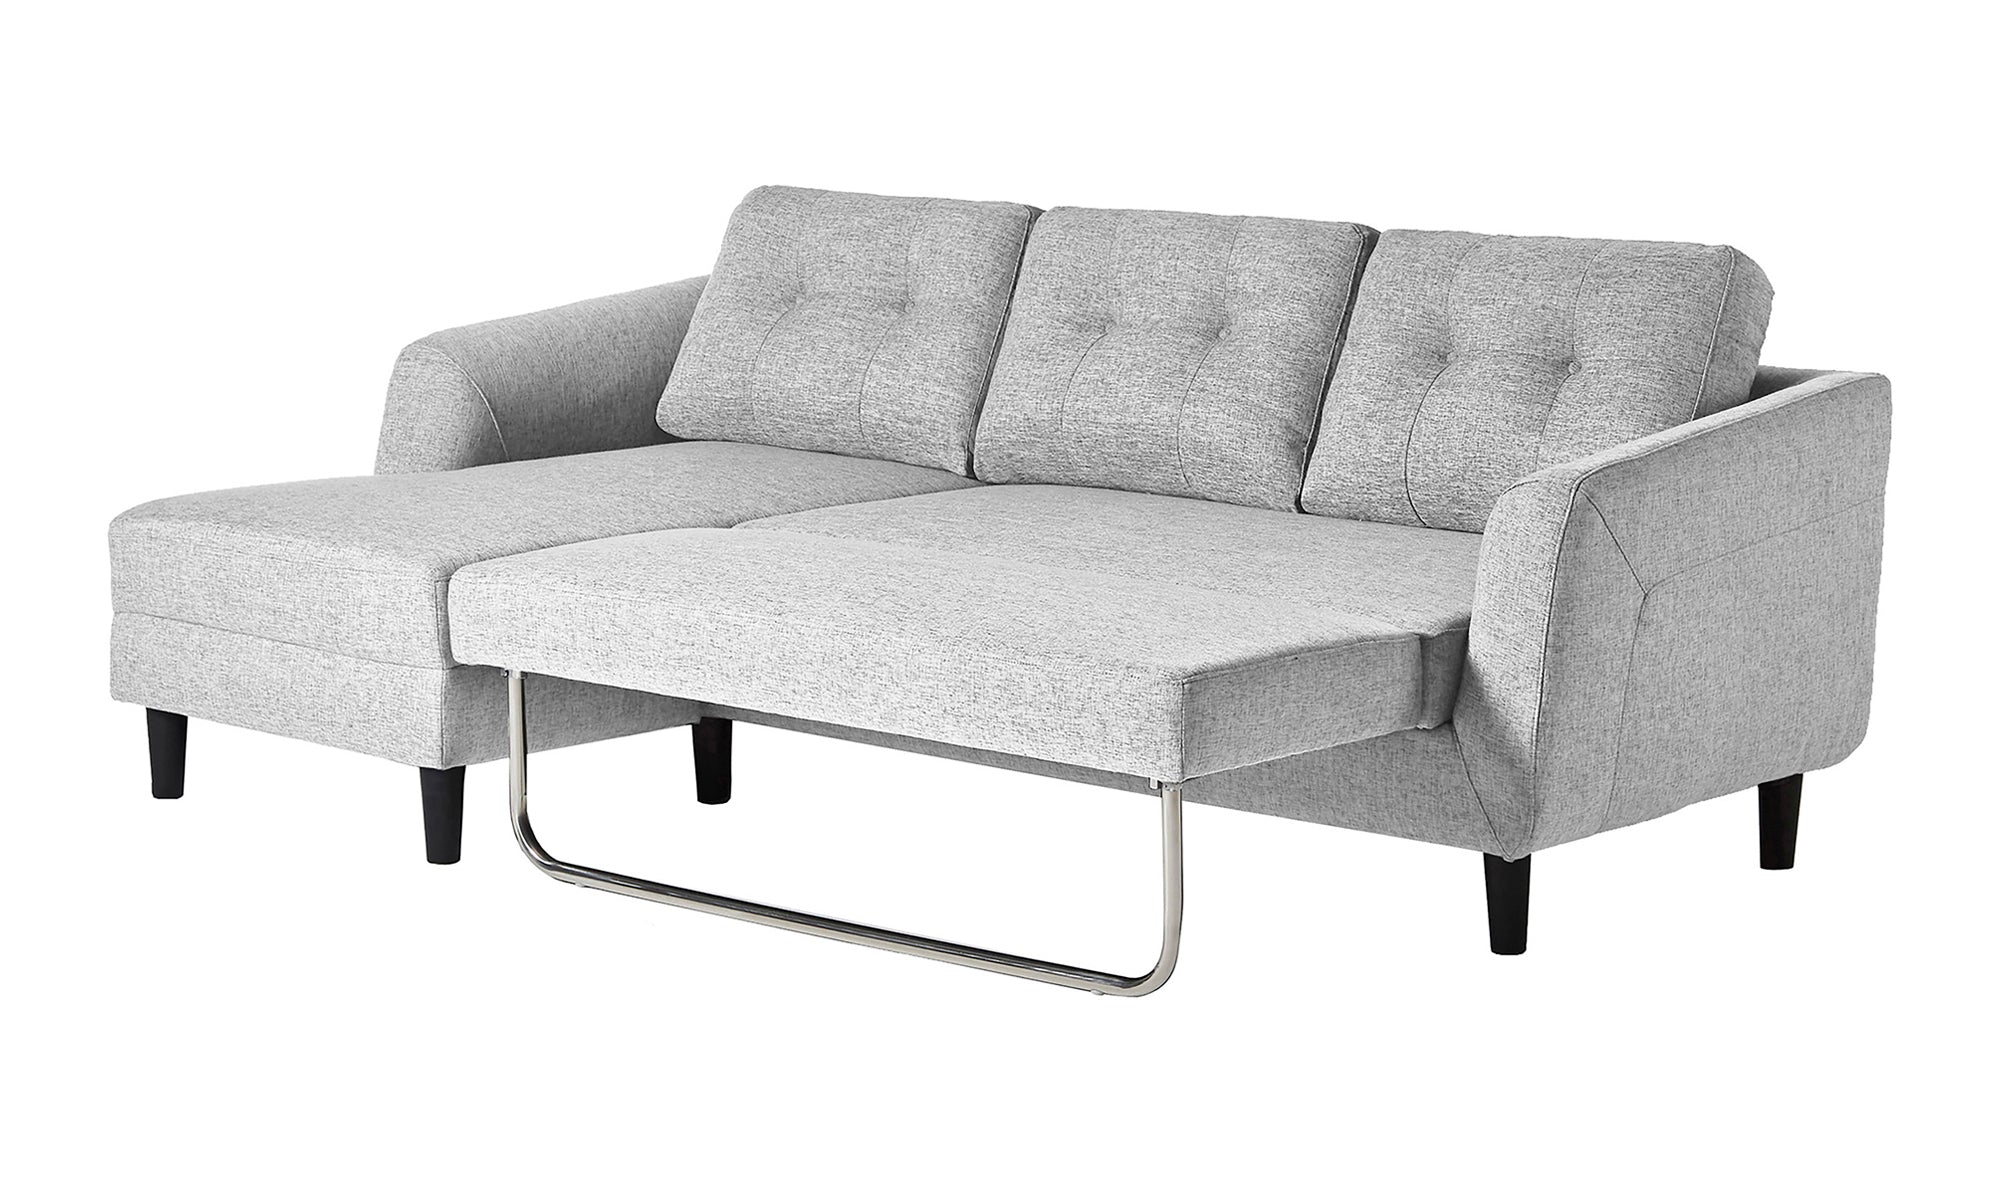 Belagio Left Facing Sofa Bed With Chaise - Light Grey